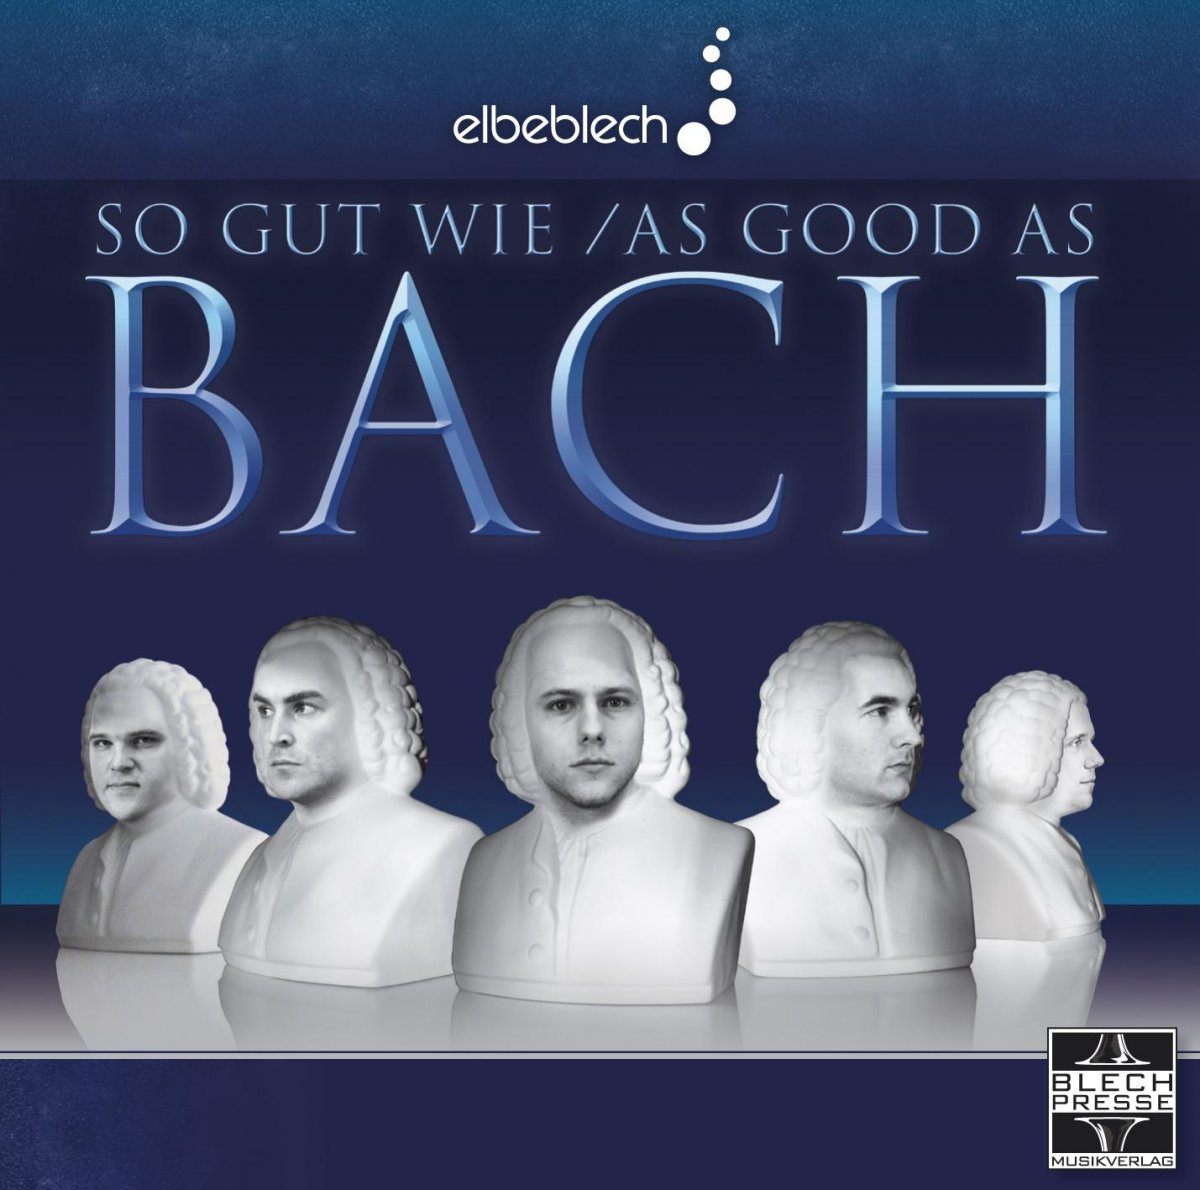 So gut wie Bach / As good as Bach - click for larger image